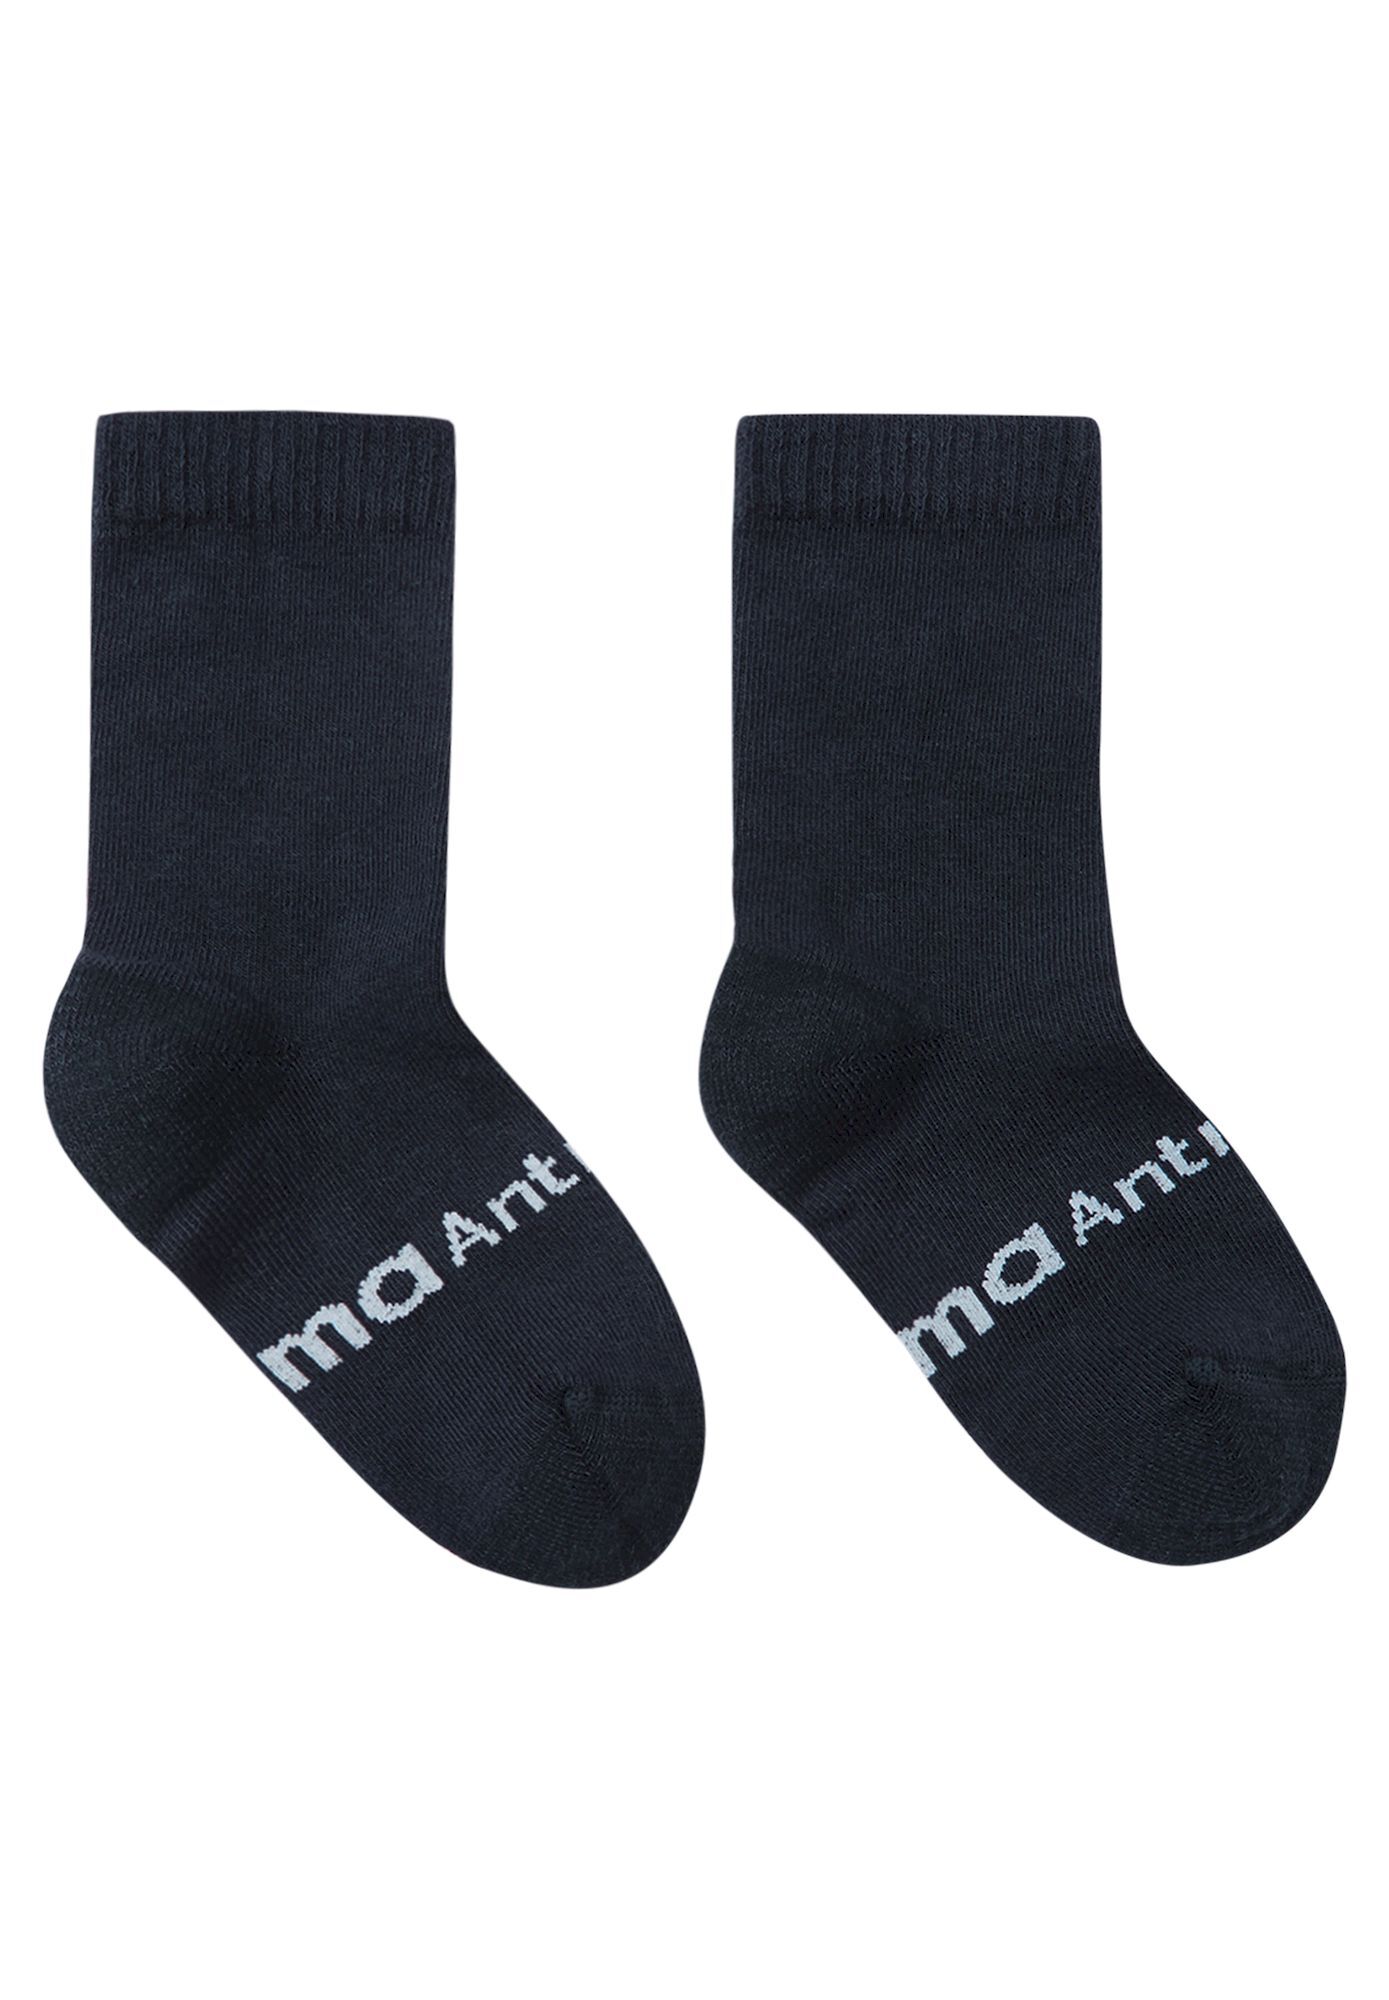 Reima Insect - Chaussettes anti-moustiques | Hardloop